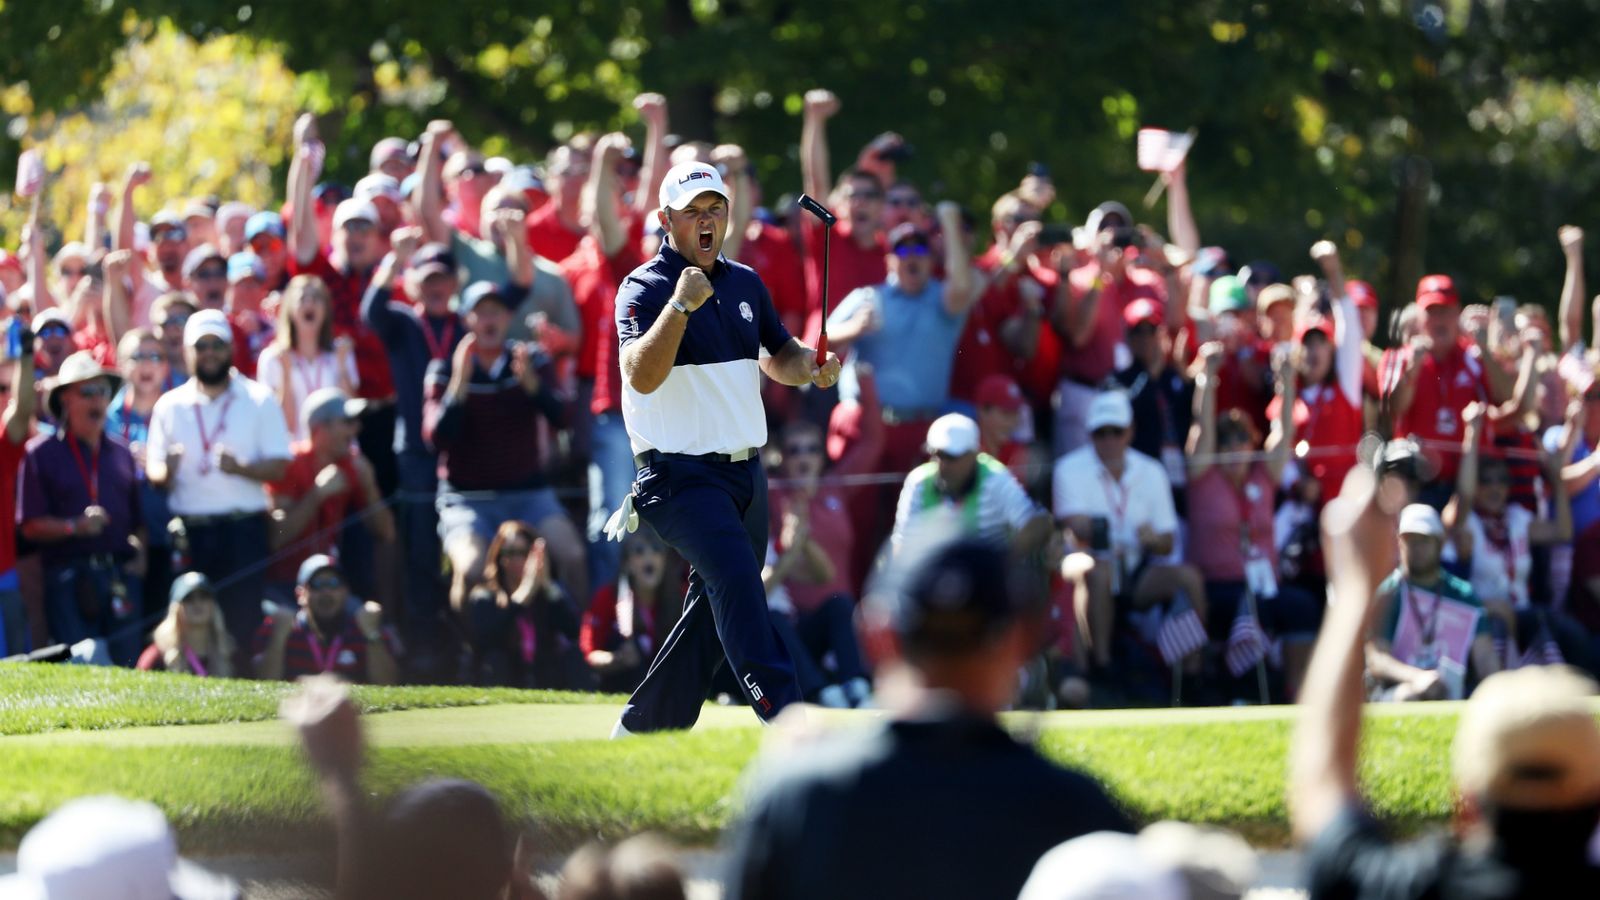 Ryder Cup Team USA defeat Europe 1711 to win trophy for first time in